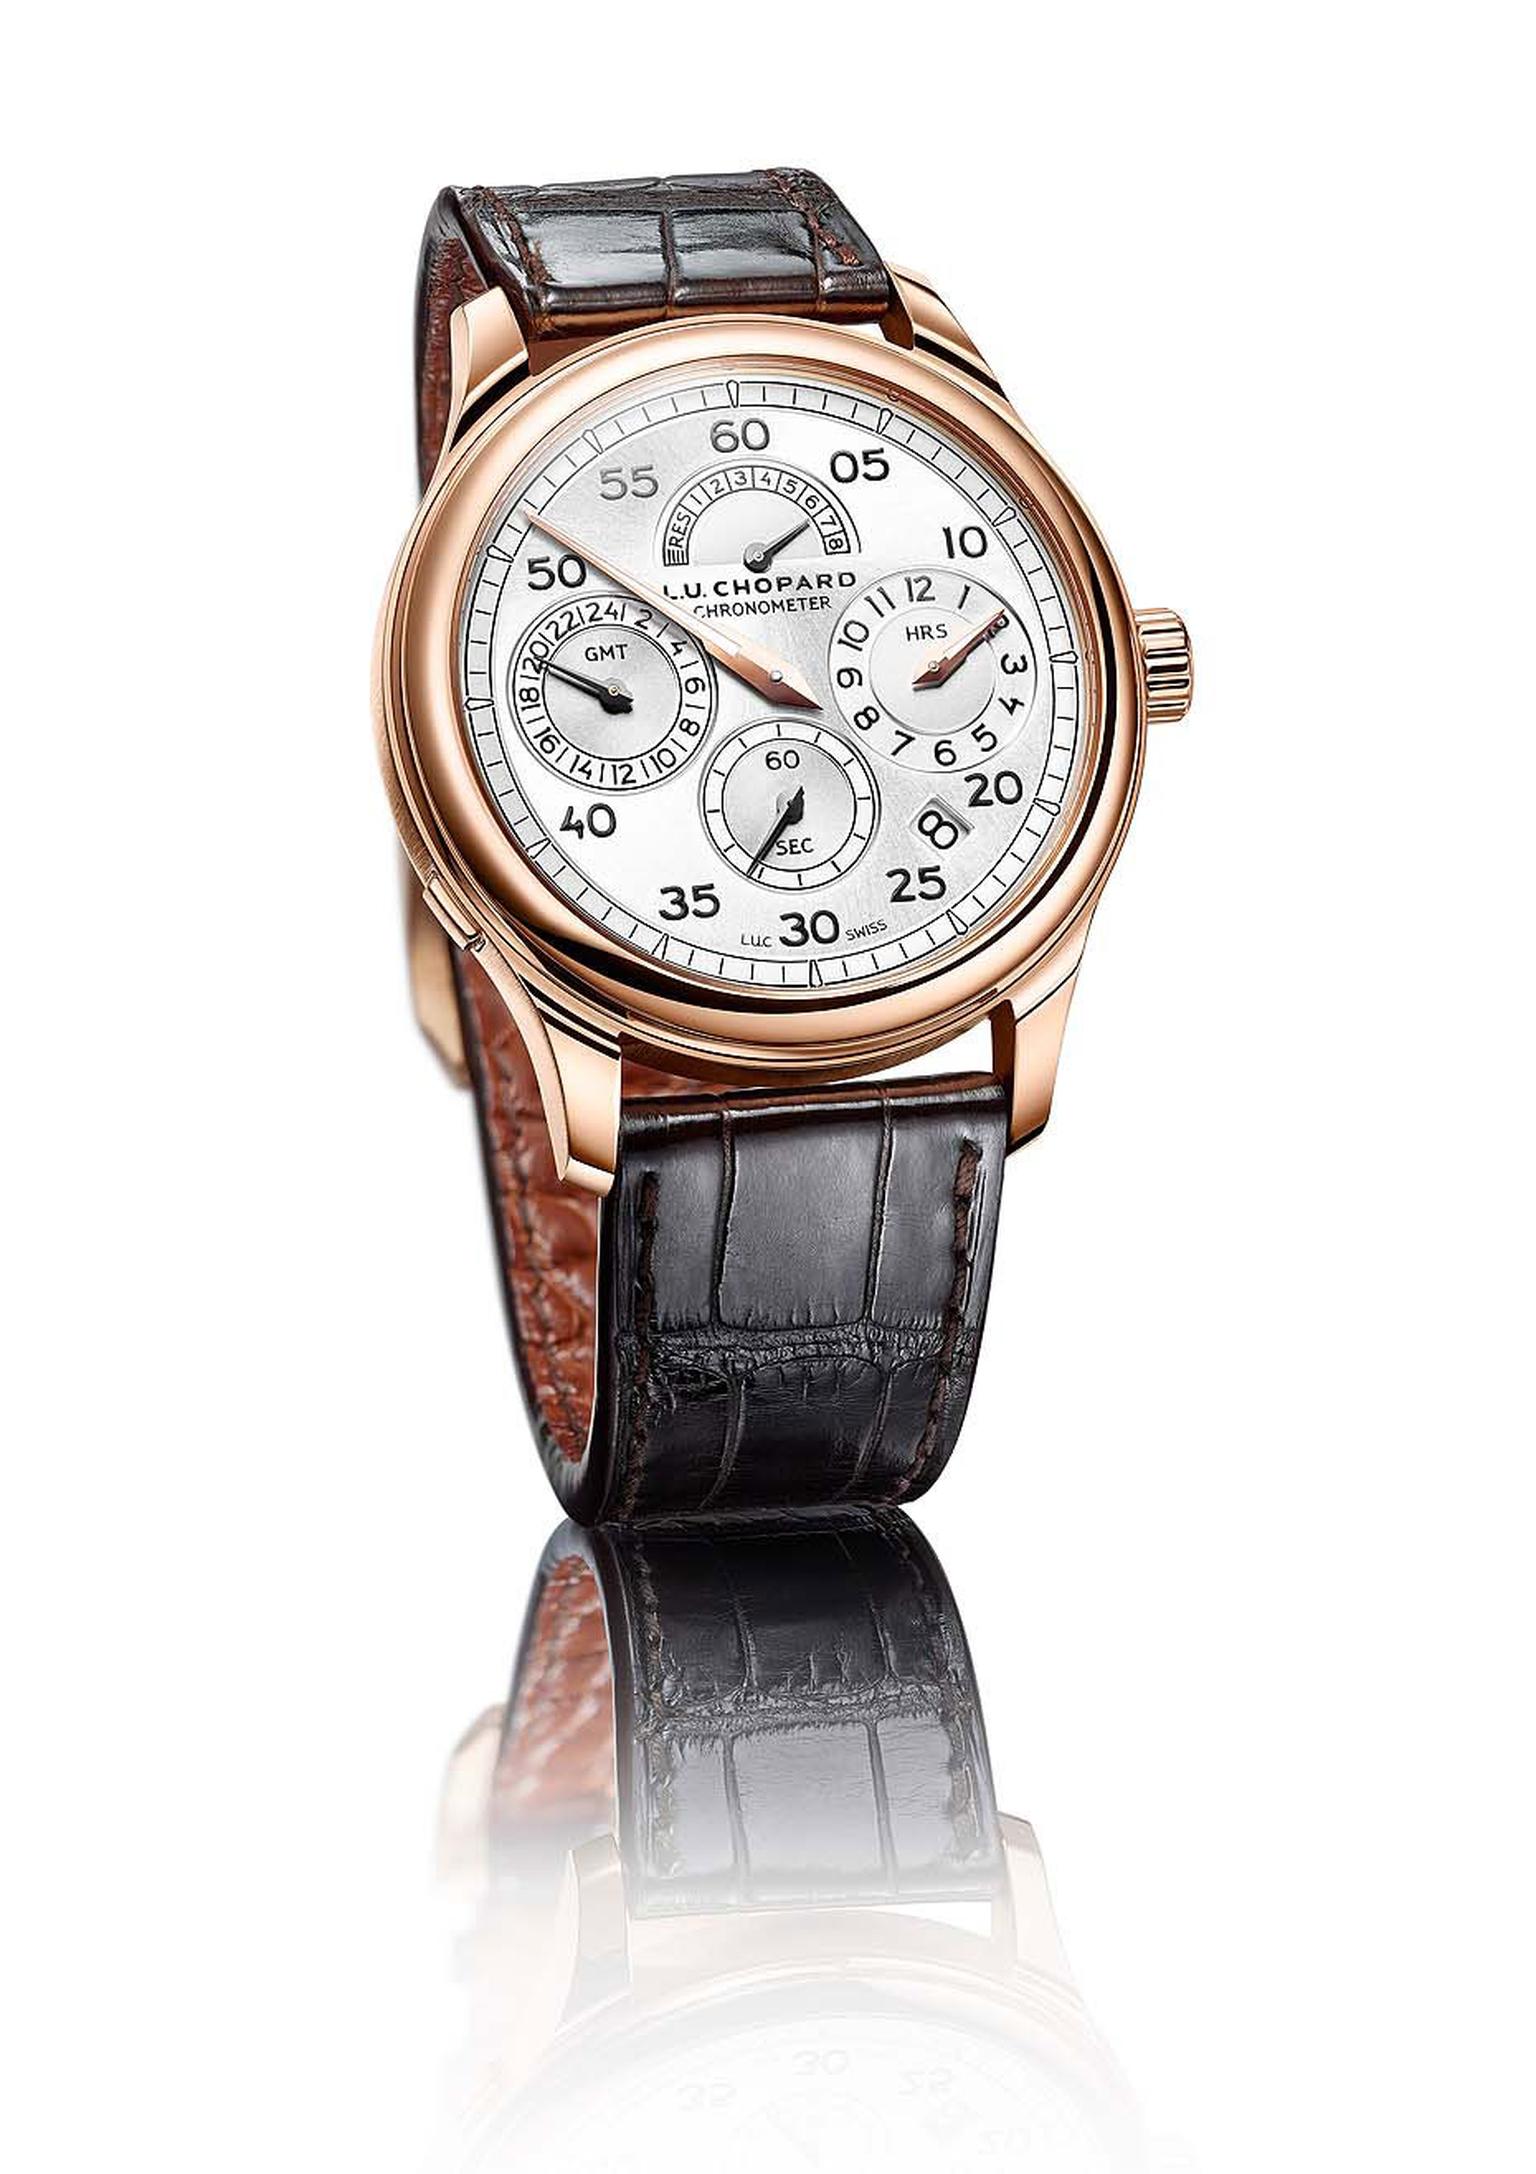 Chopard watches has revisited the regulator clock with its new L.U.C Regulator model in rose gold. The central minute track circles the perimeter of the dial, and the hours counter has been placed strategically at 3 o'clock.